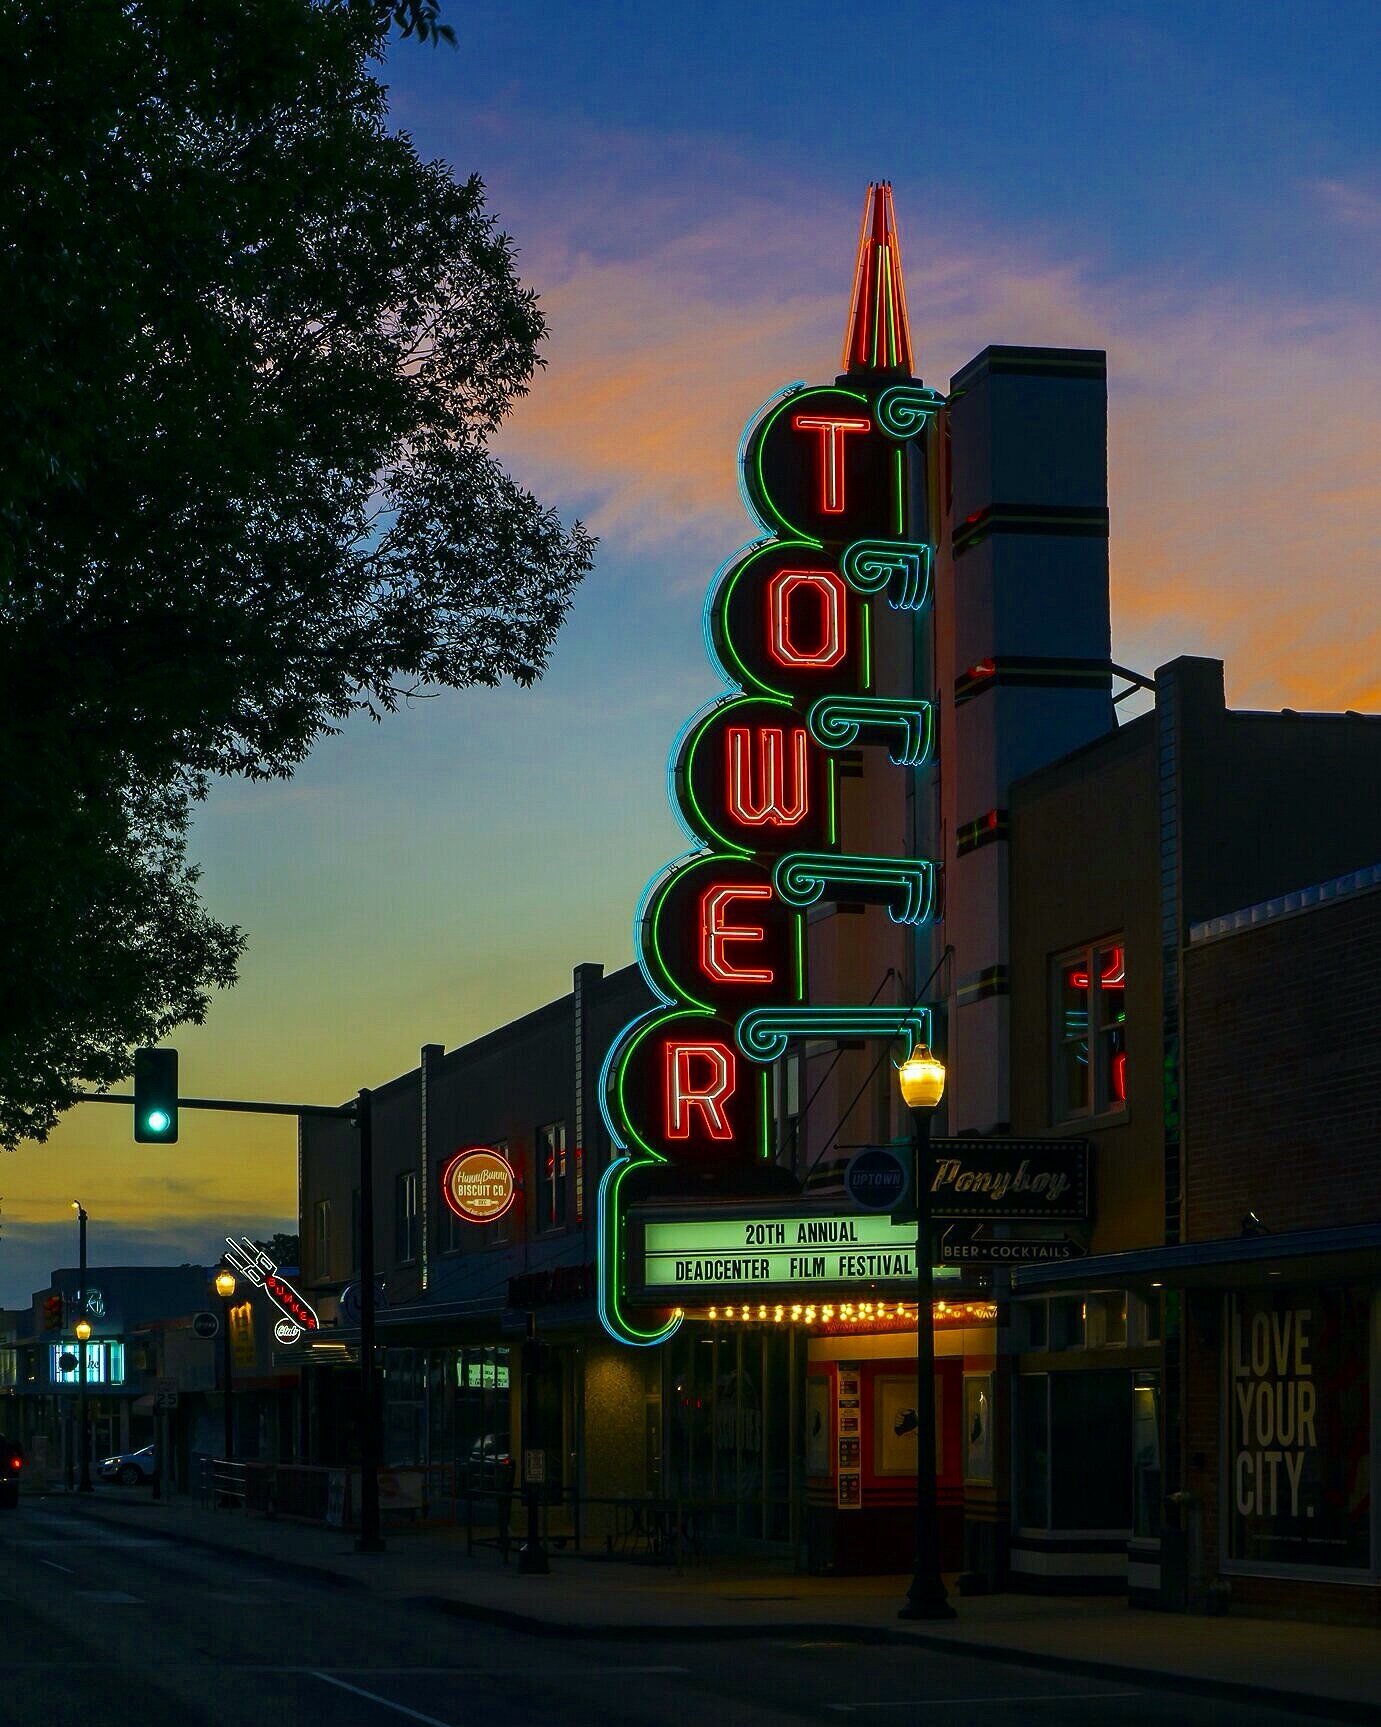 Tower Theatre, Dead Center 20th, June 2020 at Sunset